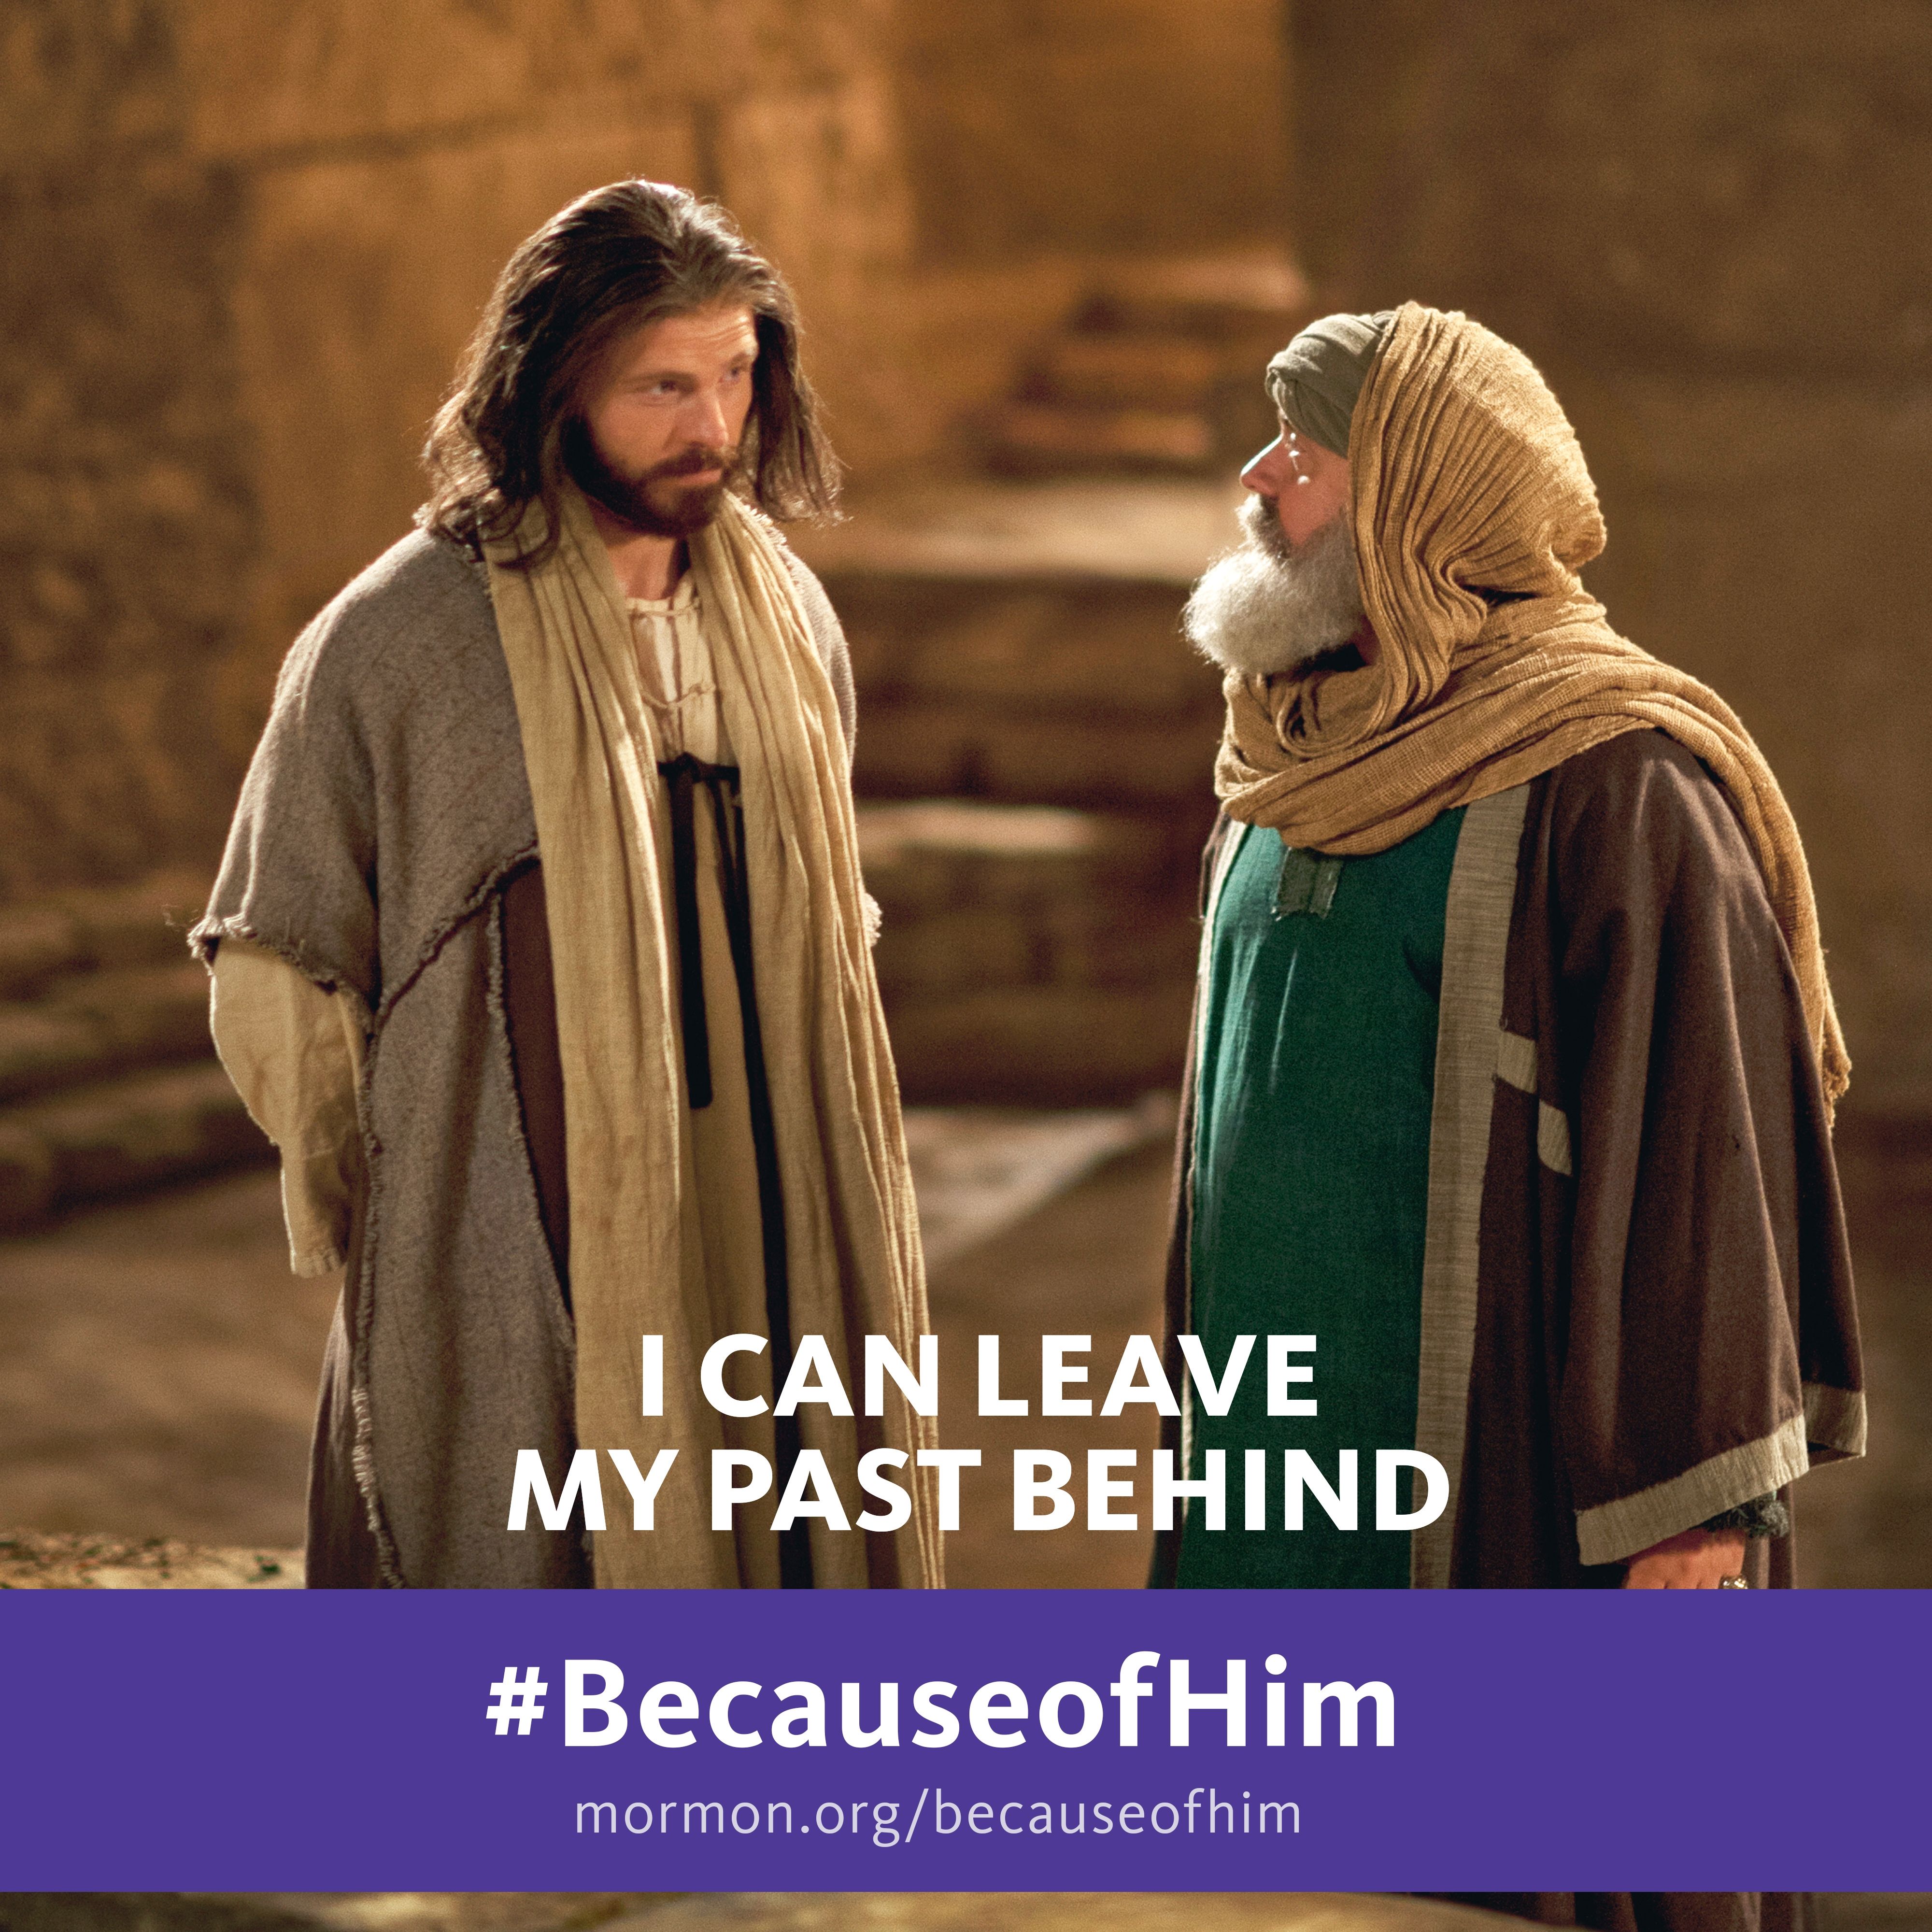 I can leave my past behind. #BecauseofHim, mormon.org/becauseofhim